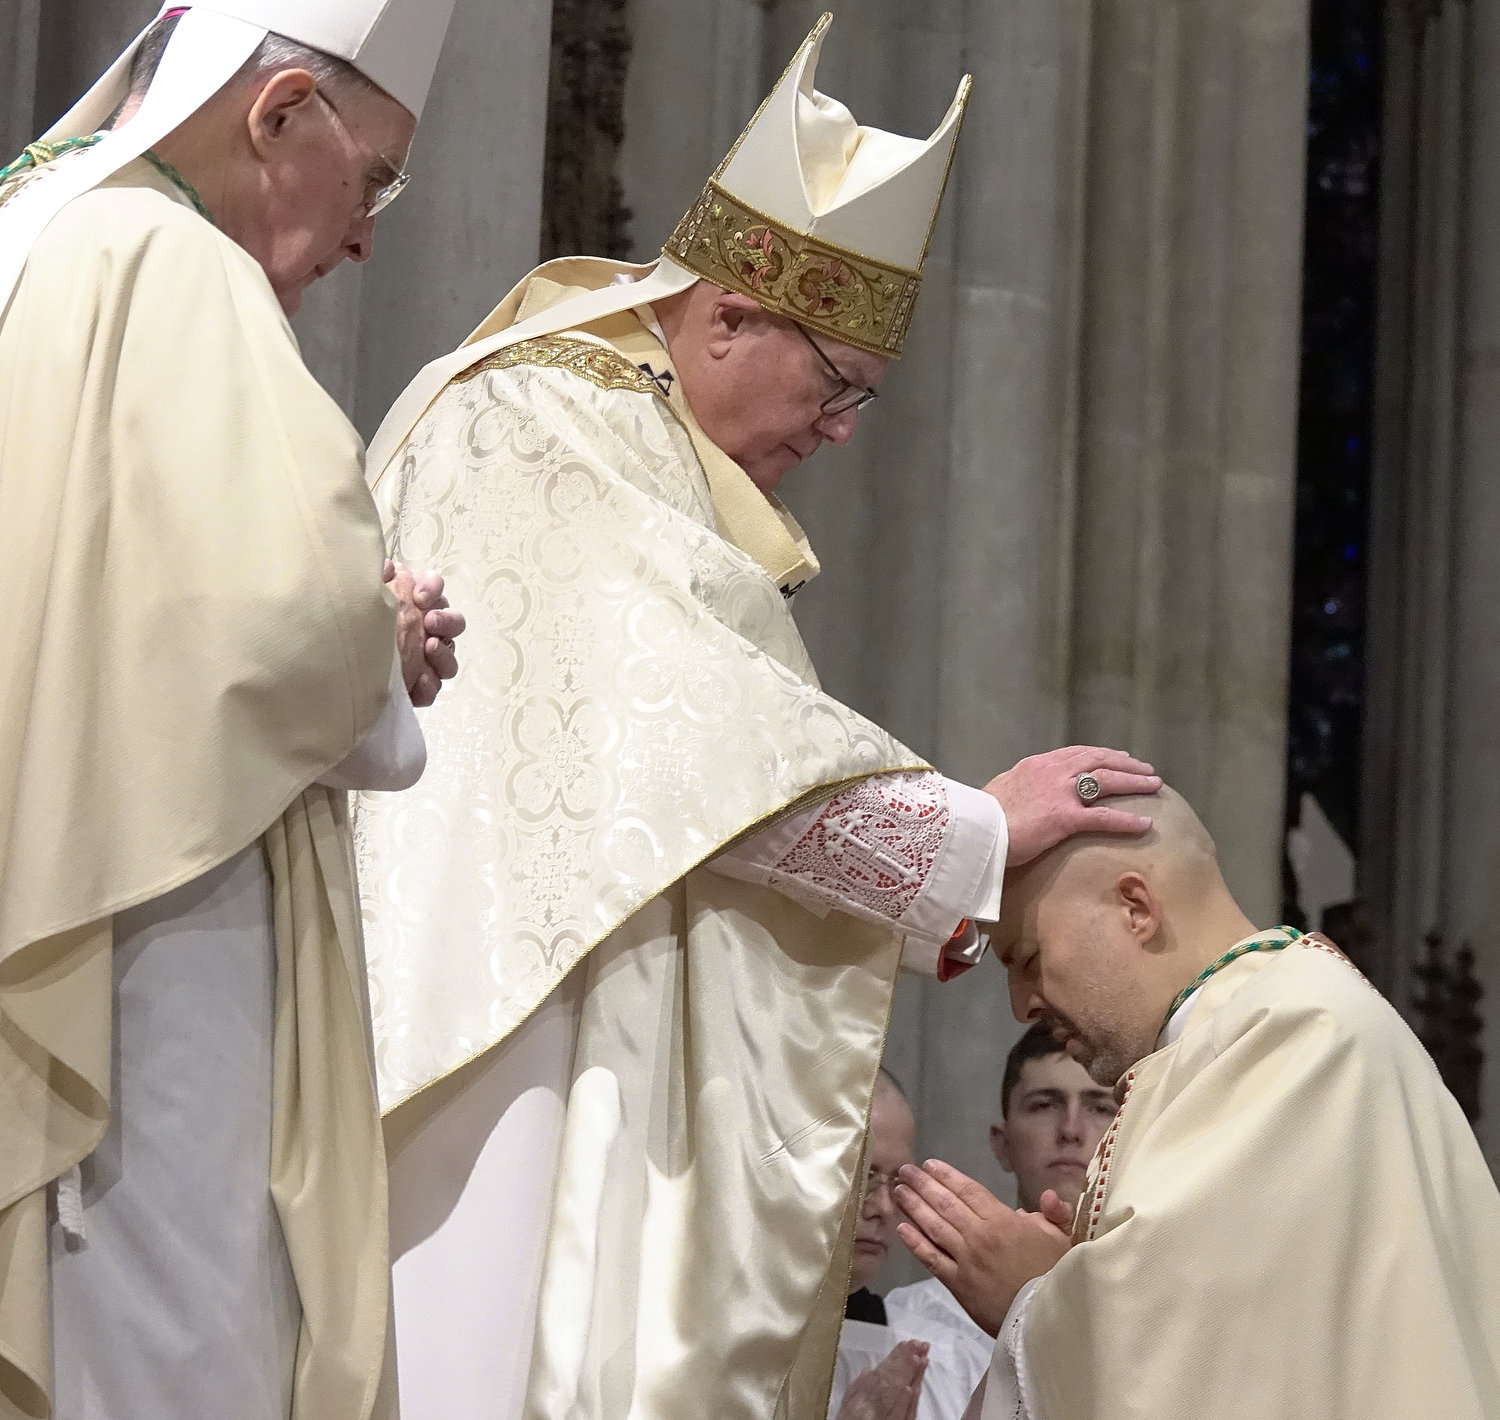 Cardinal Dolan lays hands on the head of Auxiliary Bishop Joseph A. Espaillat during his episcopal ordination March 1 at St. Patrick's Cathedral. At left is Auxiliary Bishop Emeritus Gerald T. Walsh, one of the co-ordaining bishops.